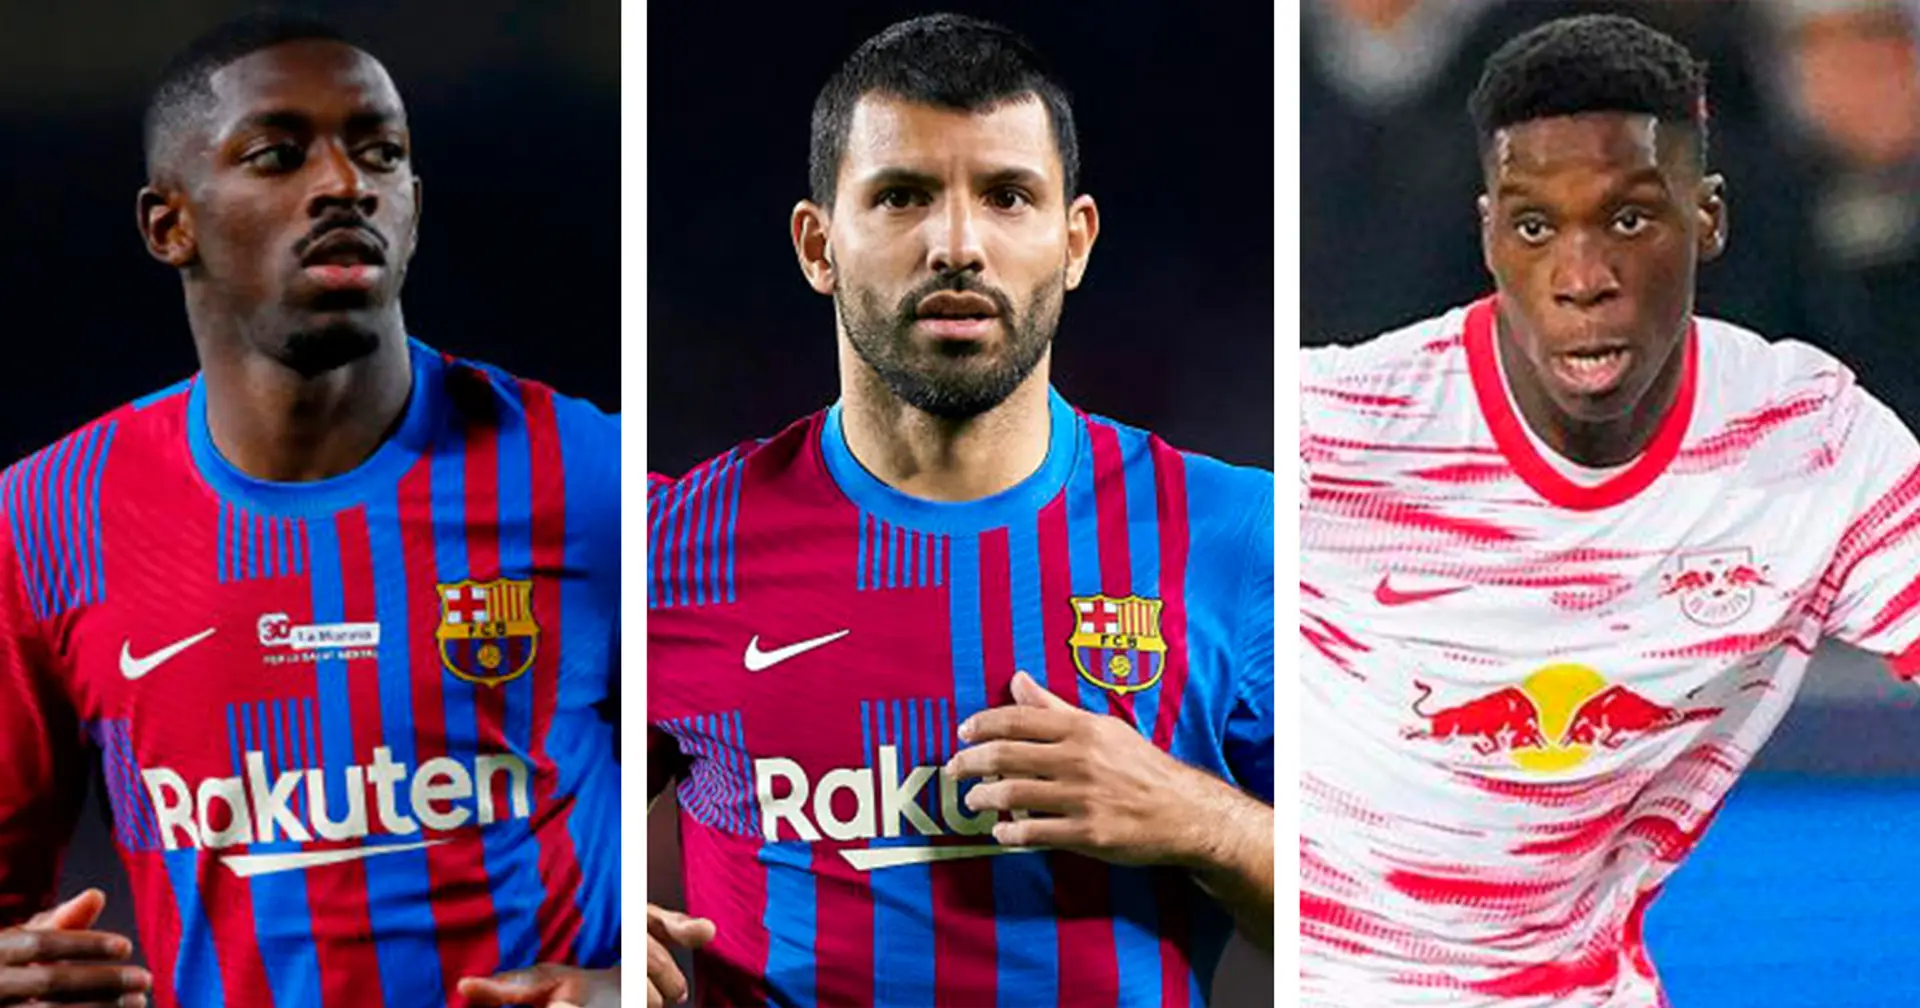 Barca players to receive no Christmas presents from club and 3 more under-radar stories of the day